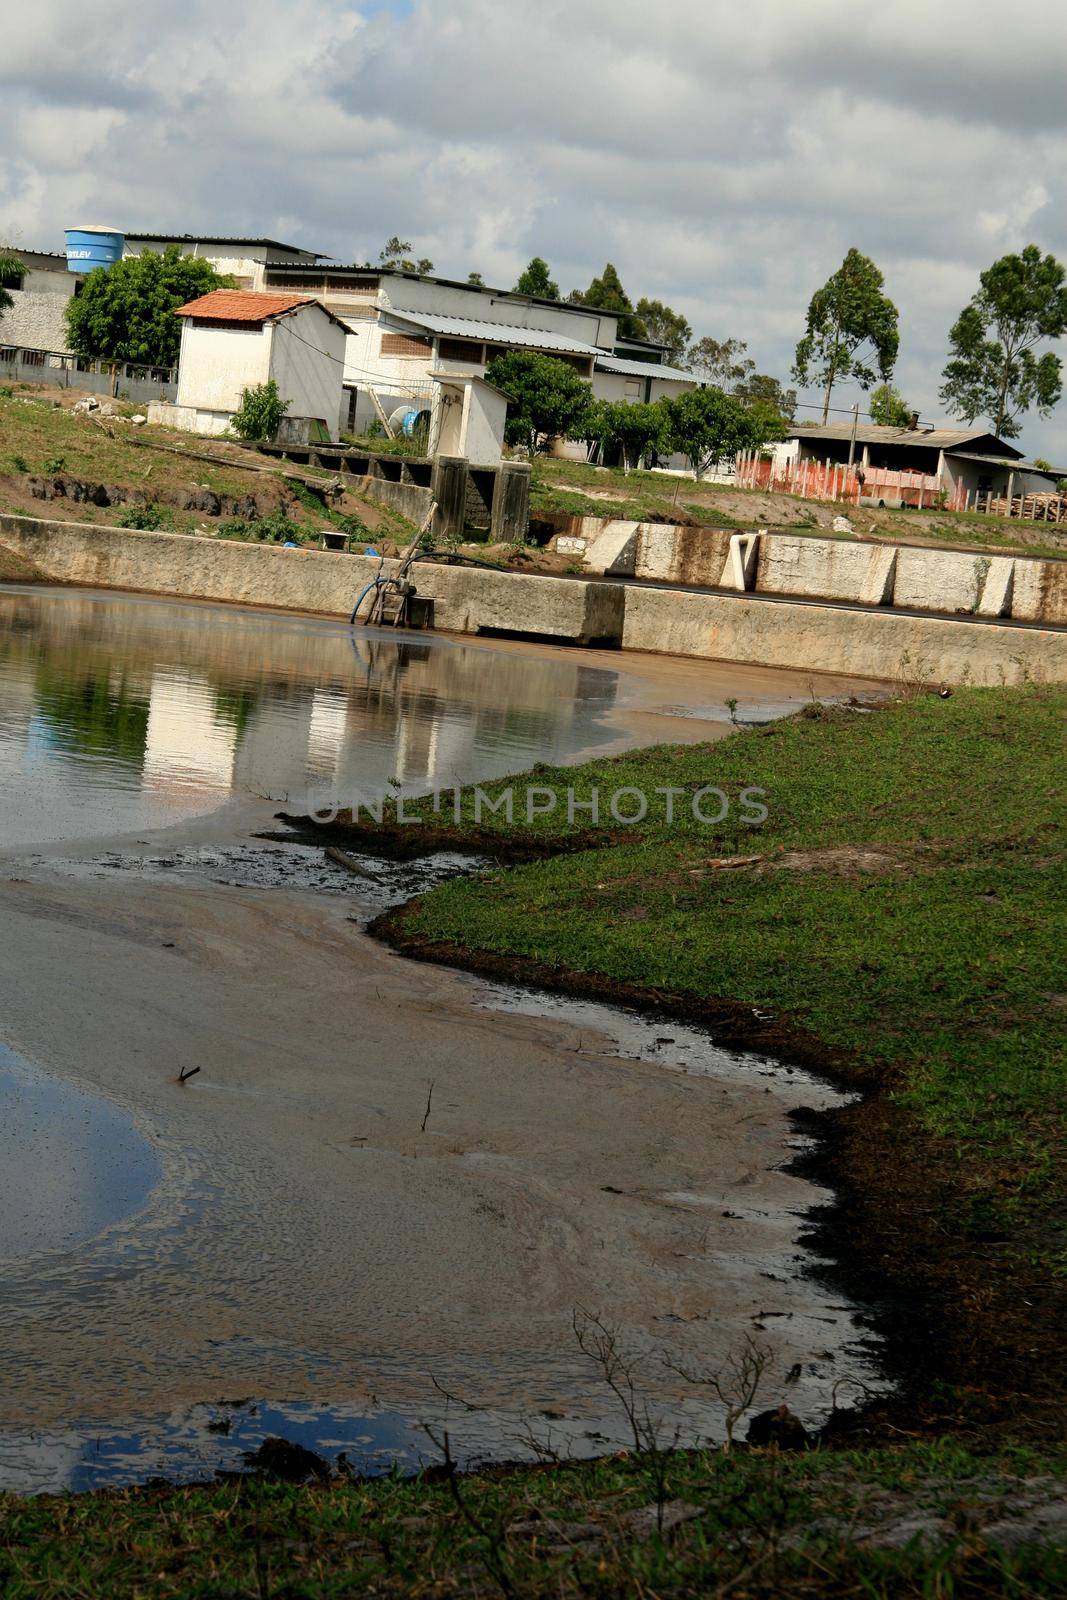 eunapolis, bahia / brazil - october 21, 2008: industrial waste water pond is seen in the city of Eunapolis, in southern Bahia.


